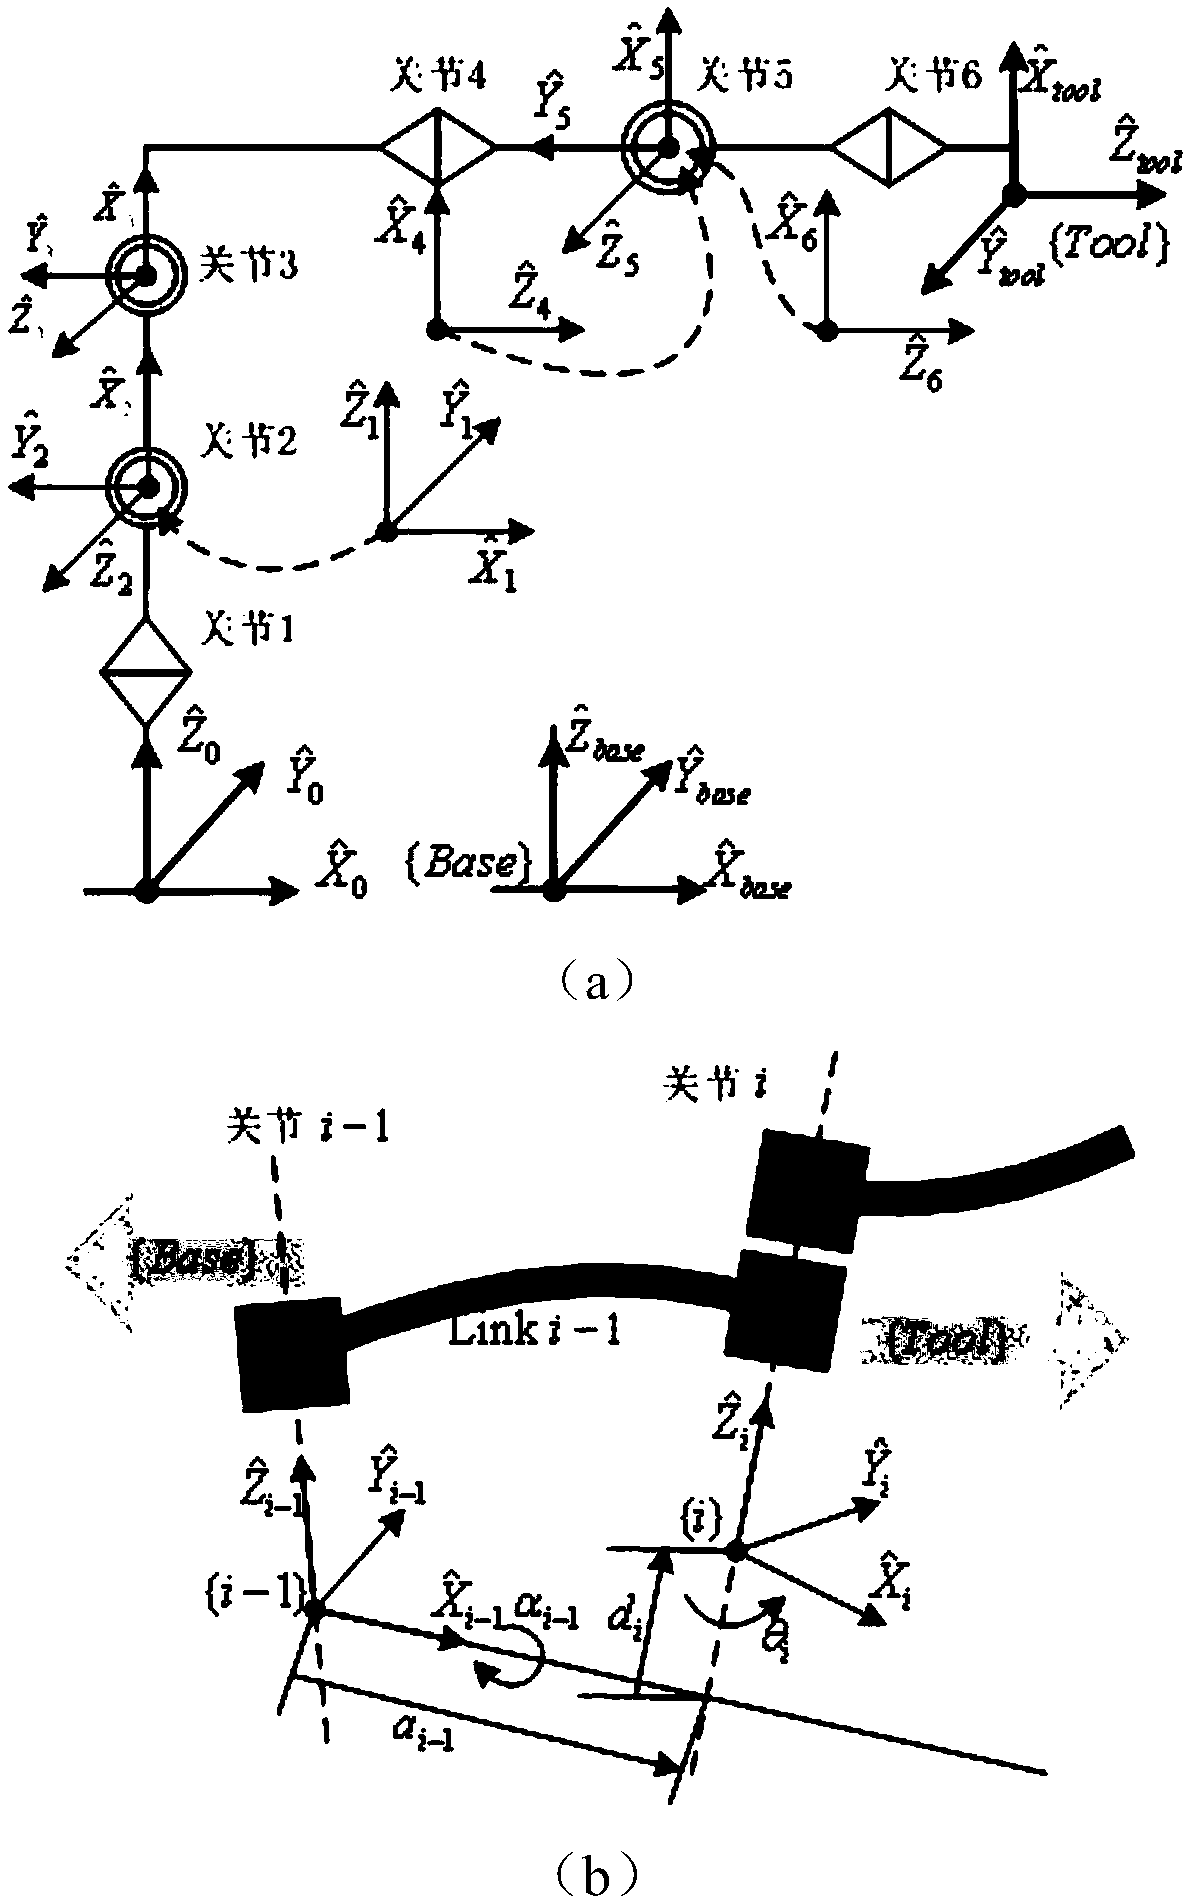 Six-degree-of-freedom robot dynamics parameter identification method and system